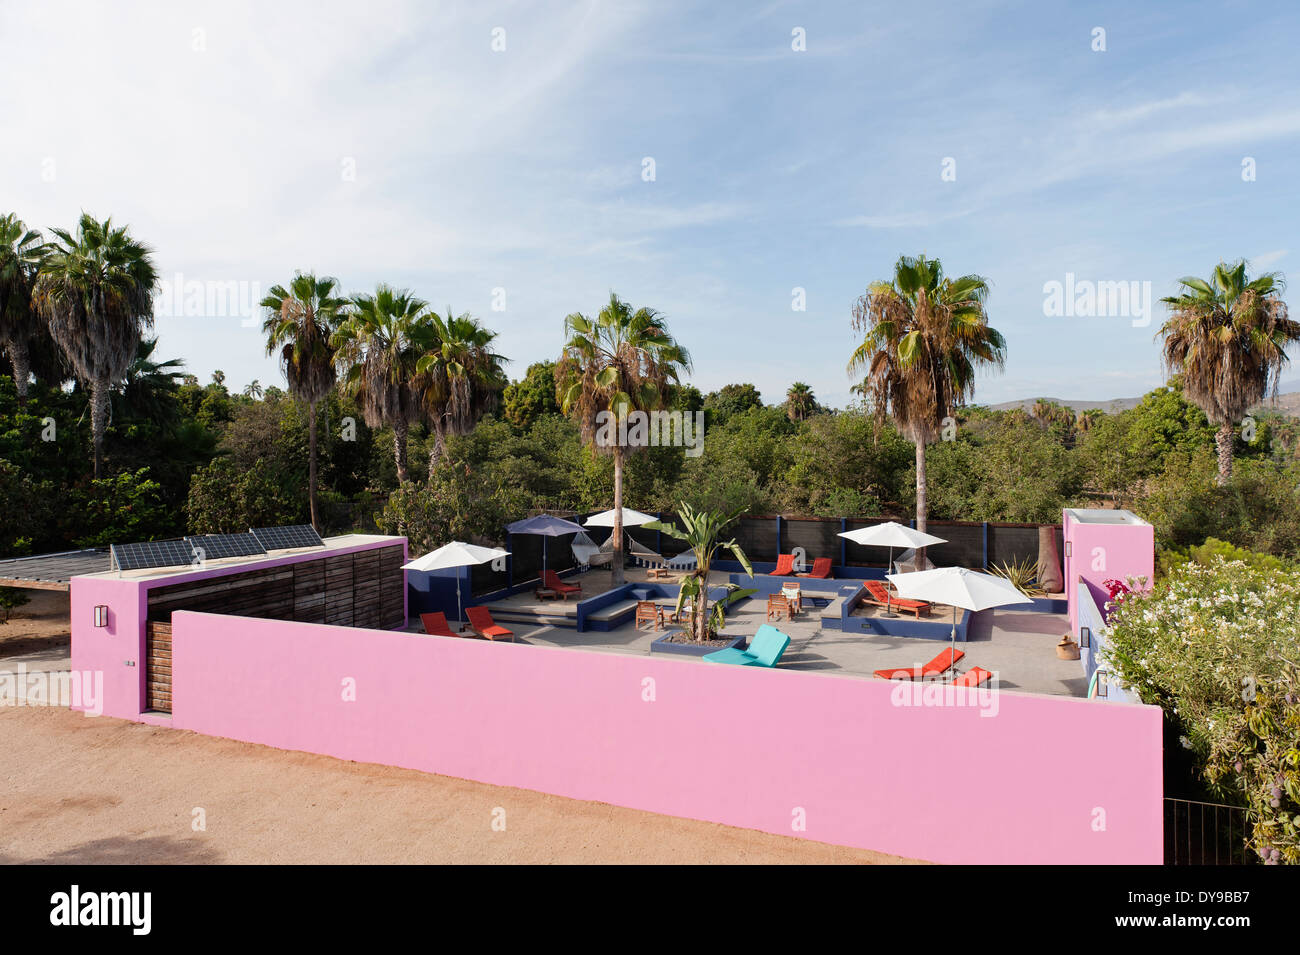 View of hotel courtyard with palm trees, pink outerwall and solar panels Stock Photo